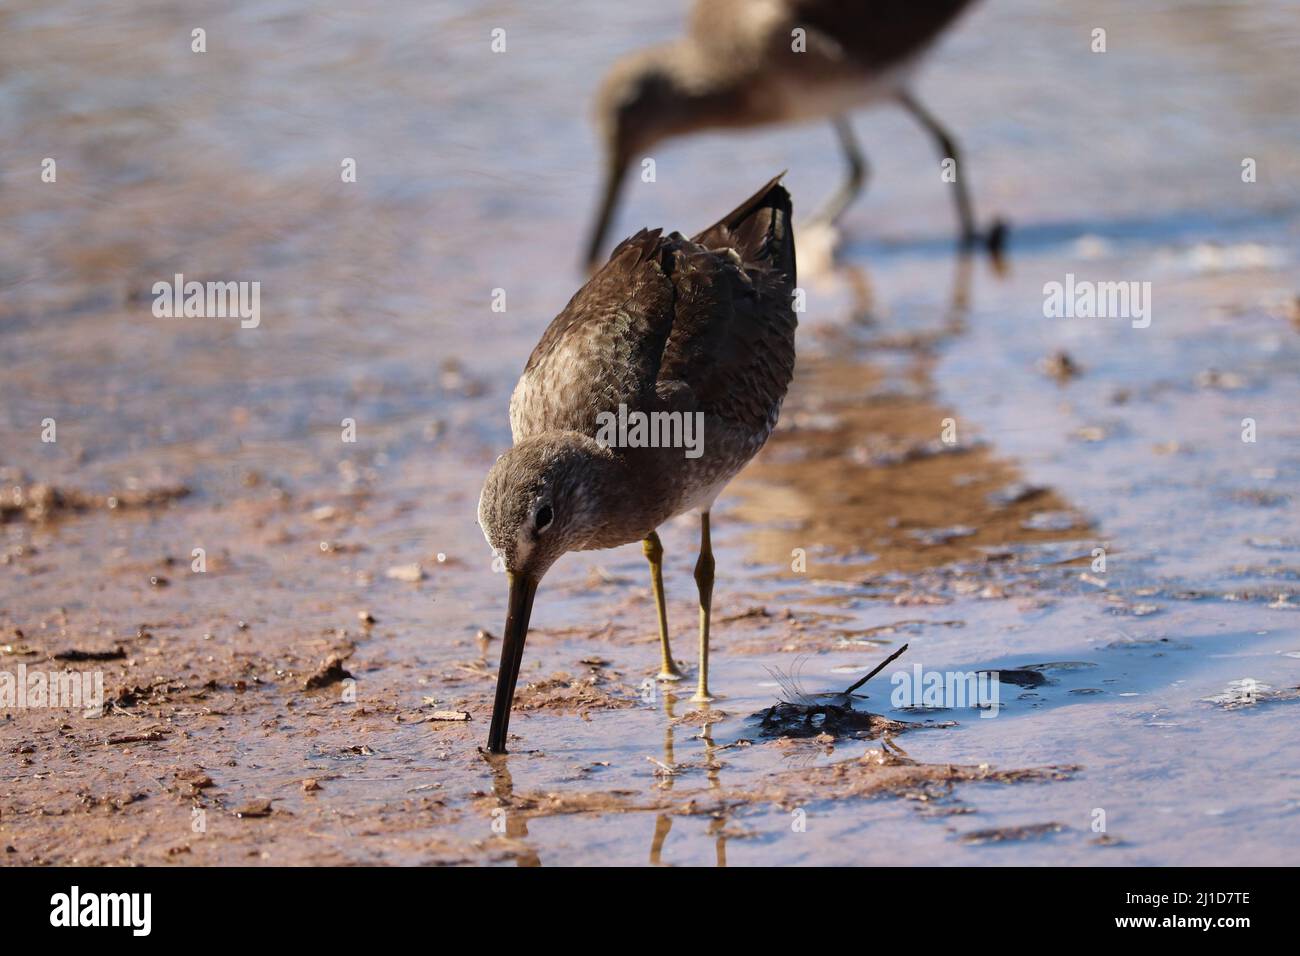 Long-billed dowitcher or Limnodromus scolopaceus searching for food at the Riparian Preserve Water Ranch in Arizona. Stock Photo